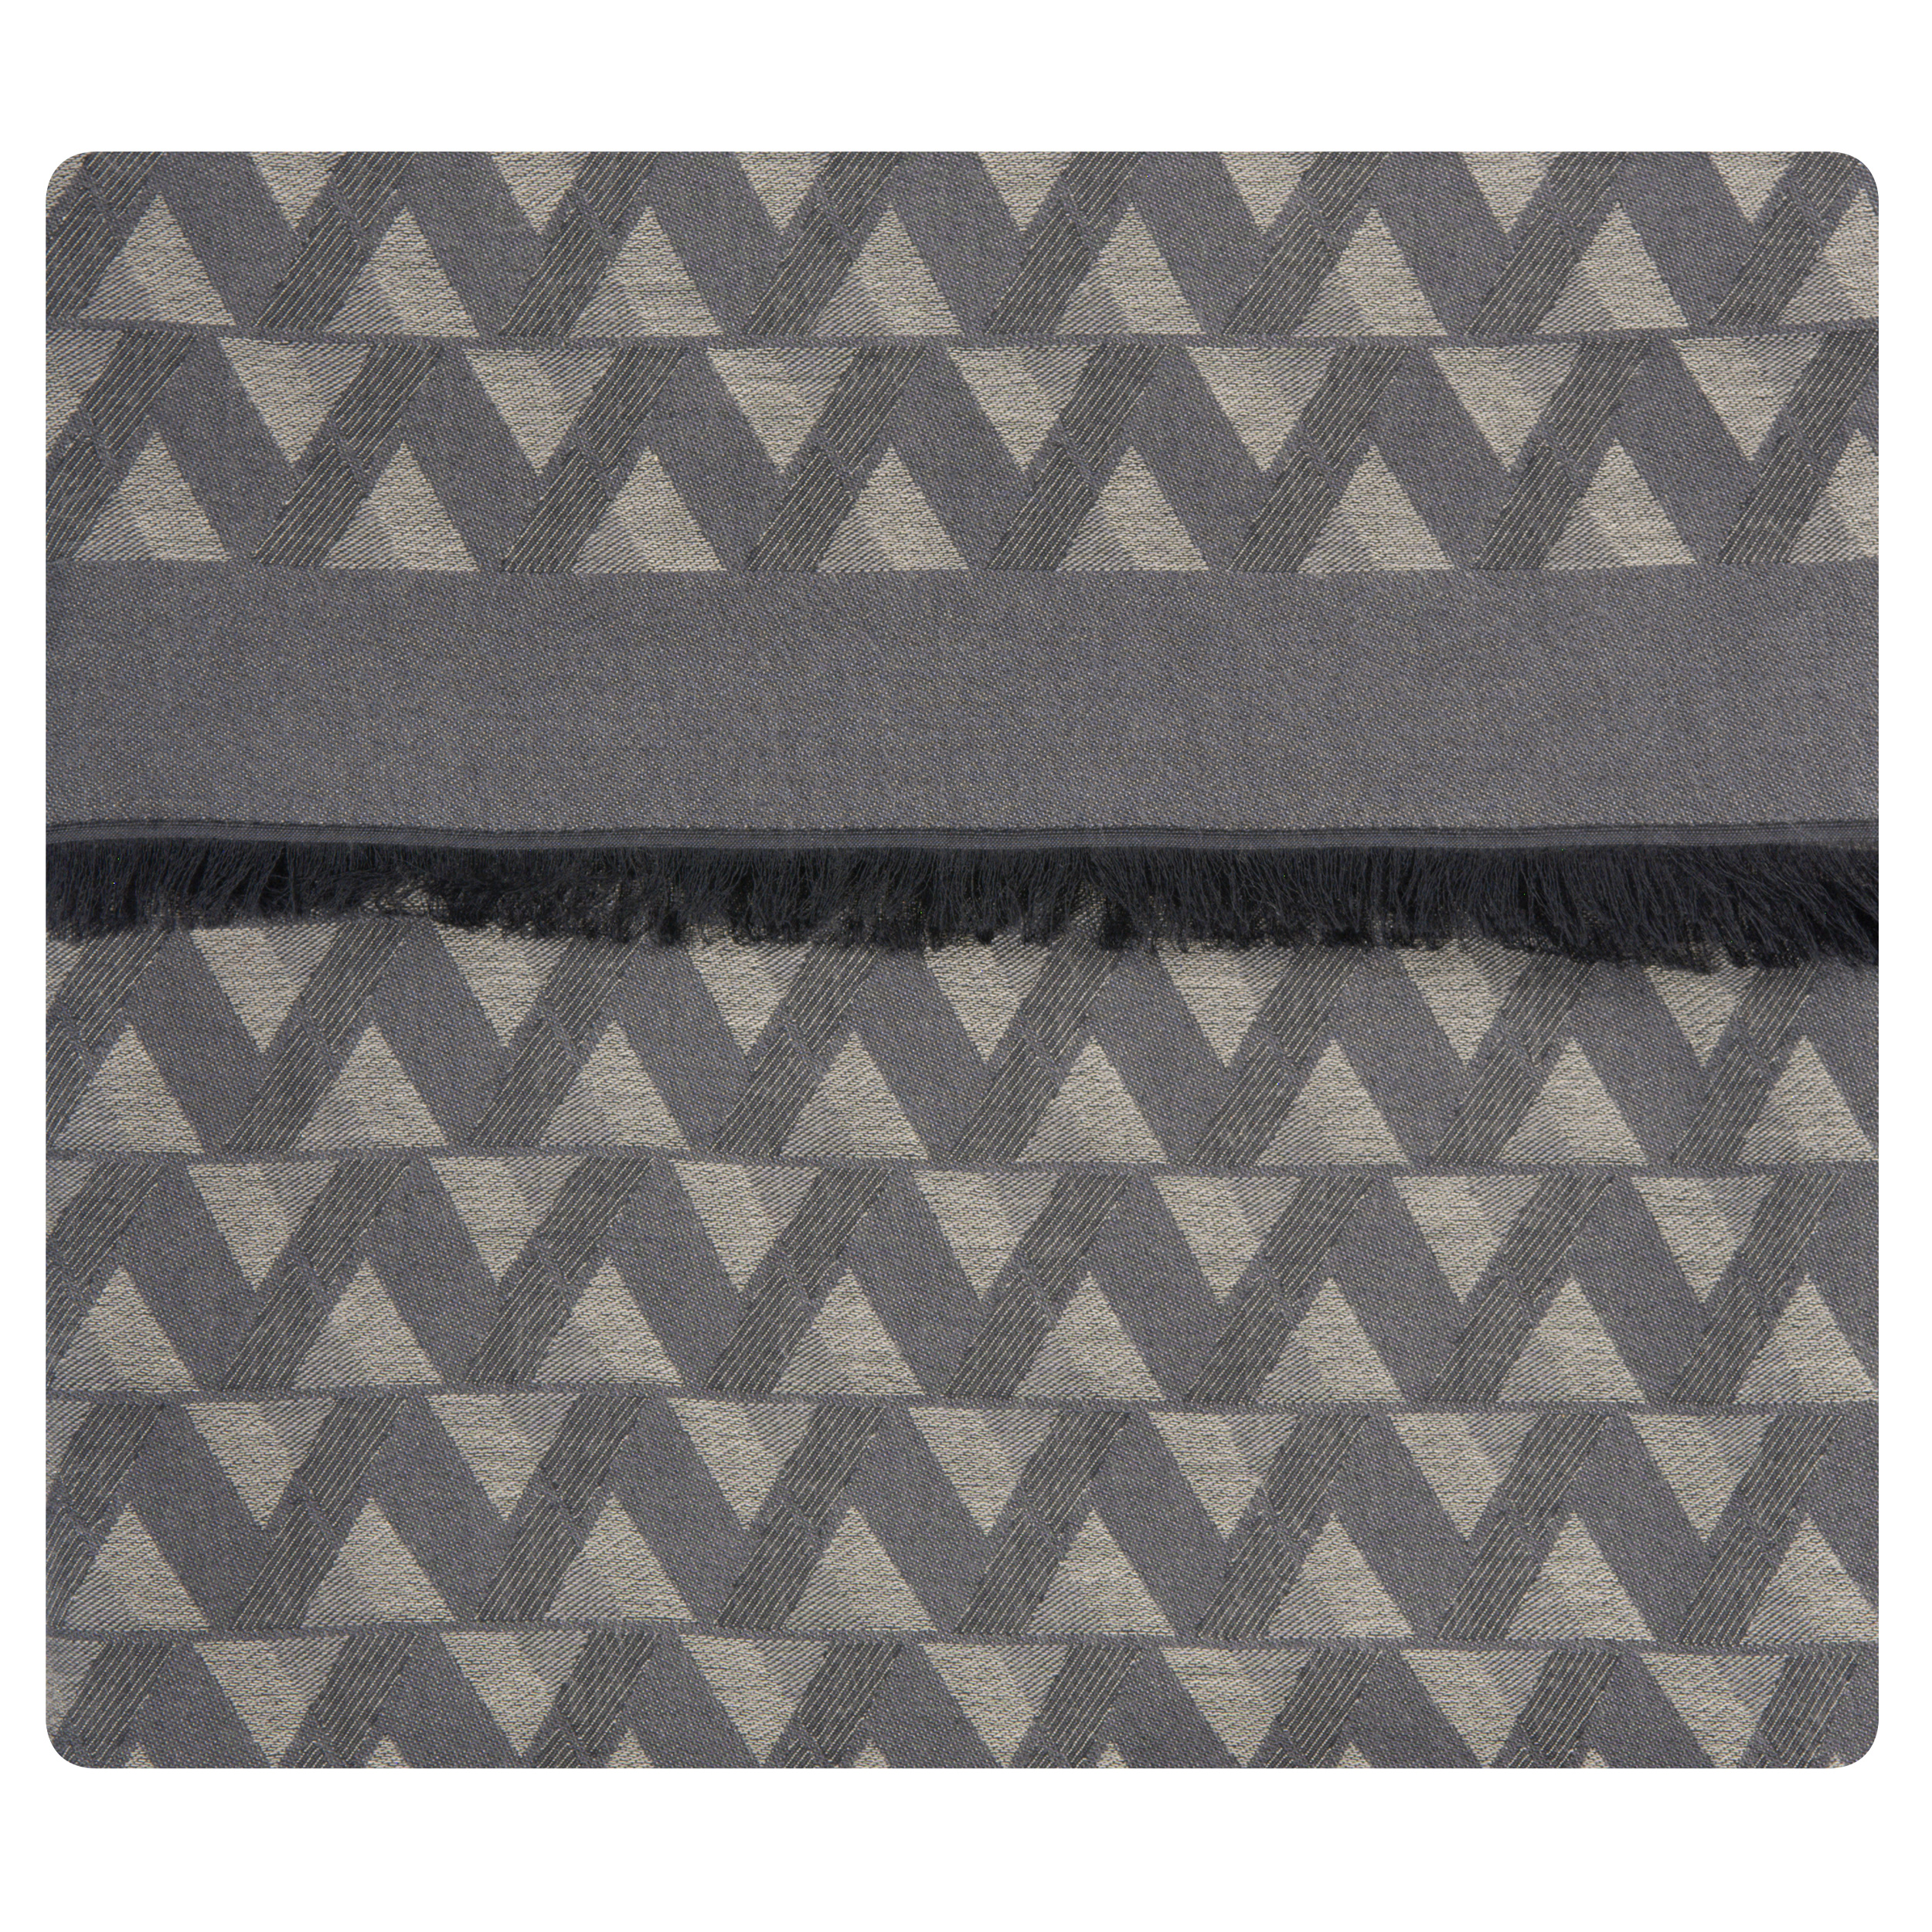 Canali ’Zig-Zag’ Patterned Scarf Brown